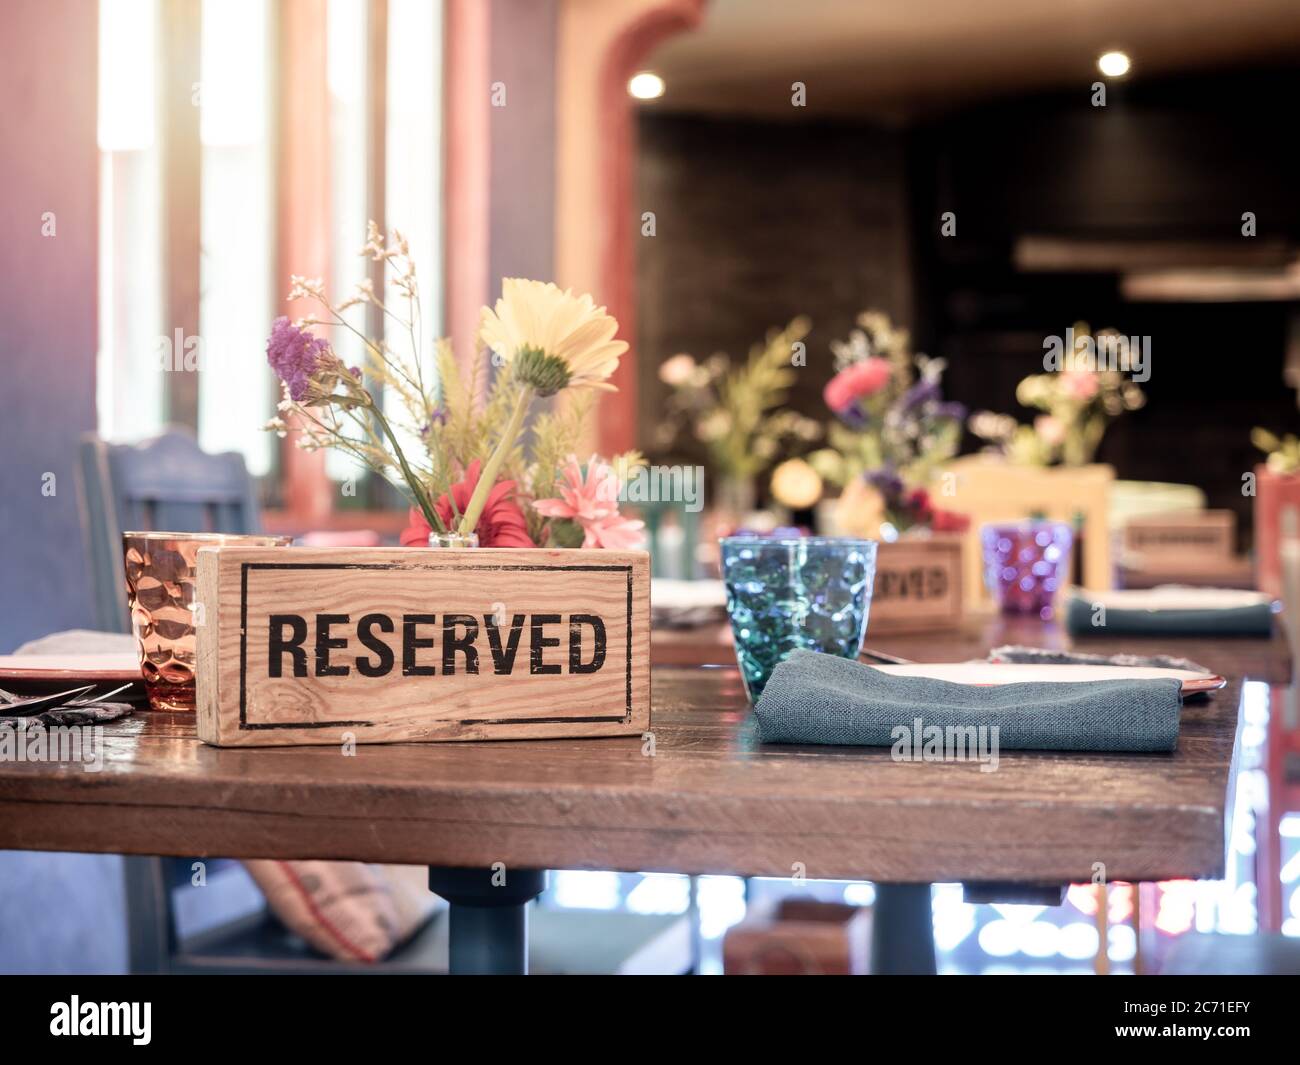 Wooden Reserved Sign Standing With Glass And Flower Pot On Dining Table In Retro Style Restaurant Stock Photo Alamy